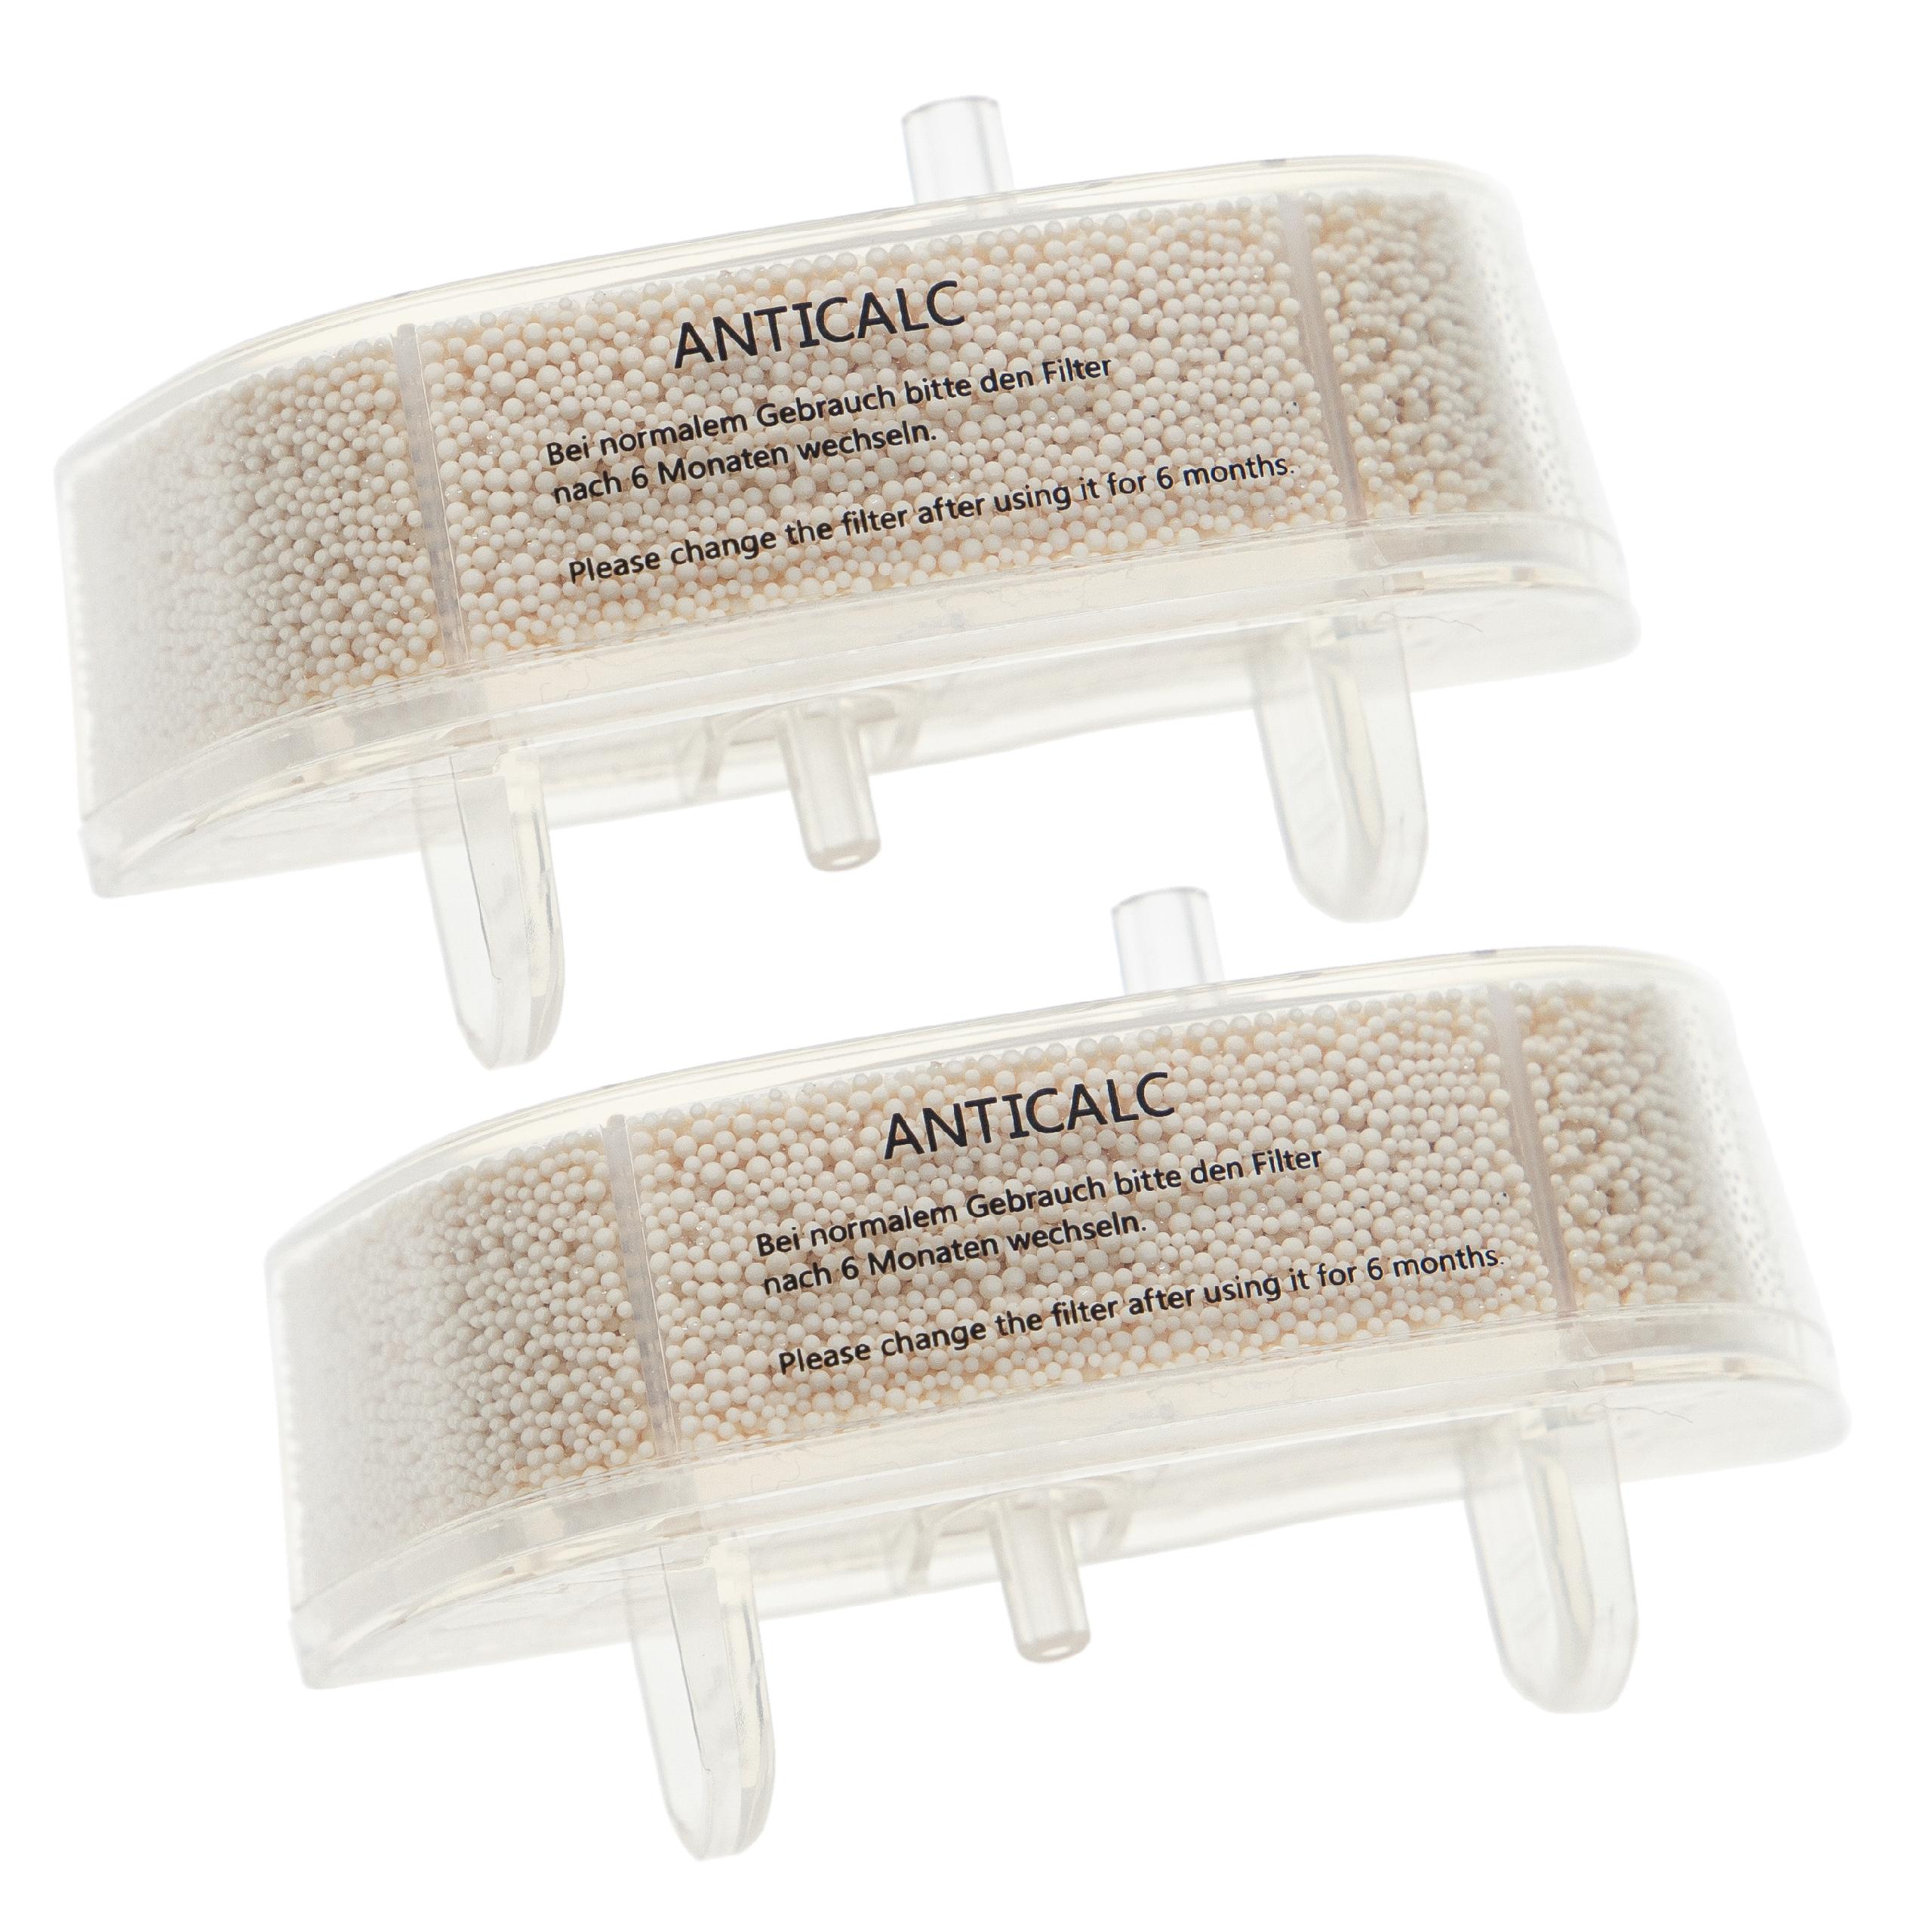  2x Anti-Calc Filter Cartridge replaces Rowenta ZR006501 for Rowenta Steam Cleaner